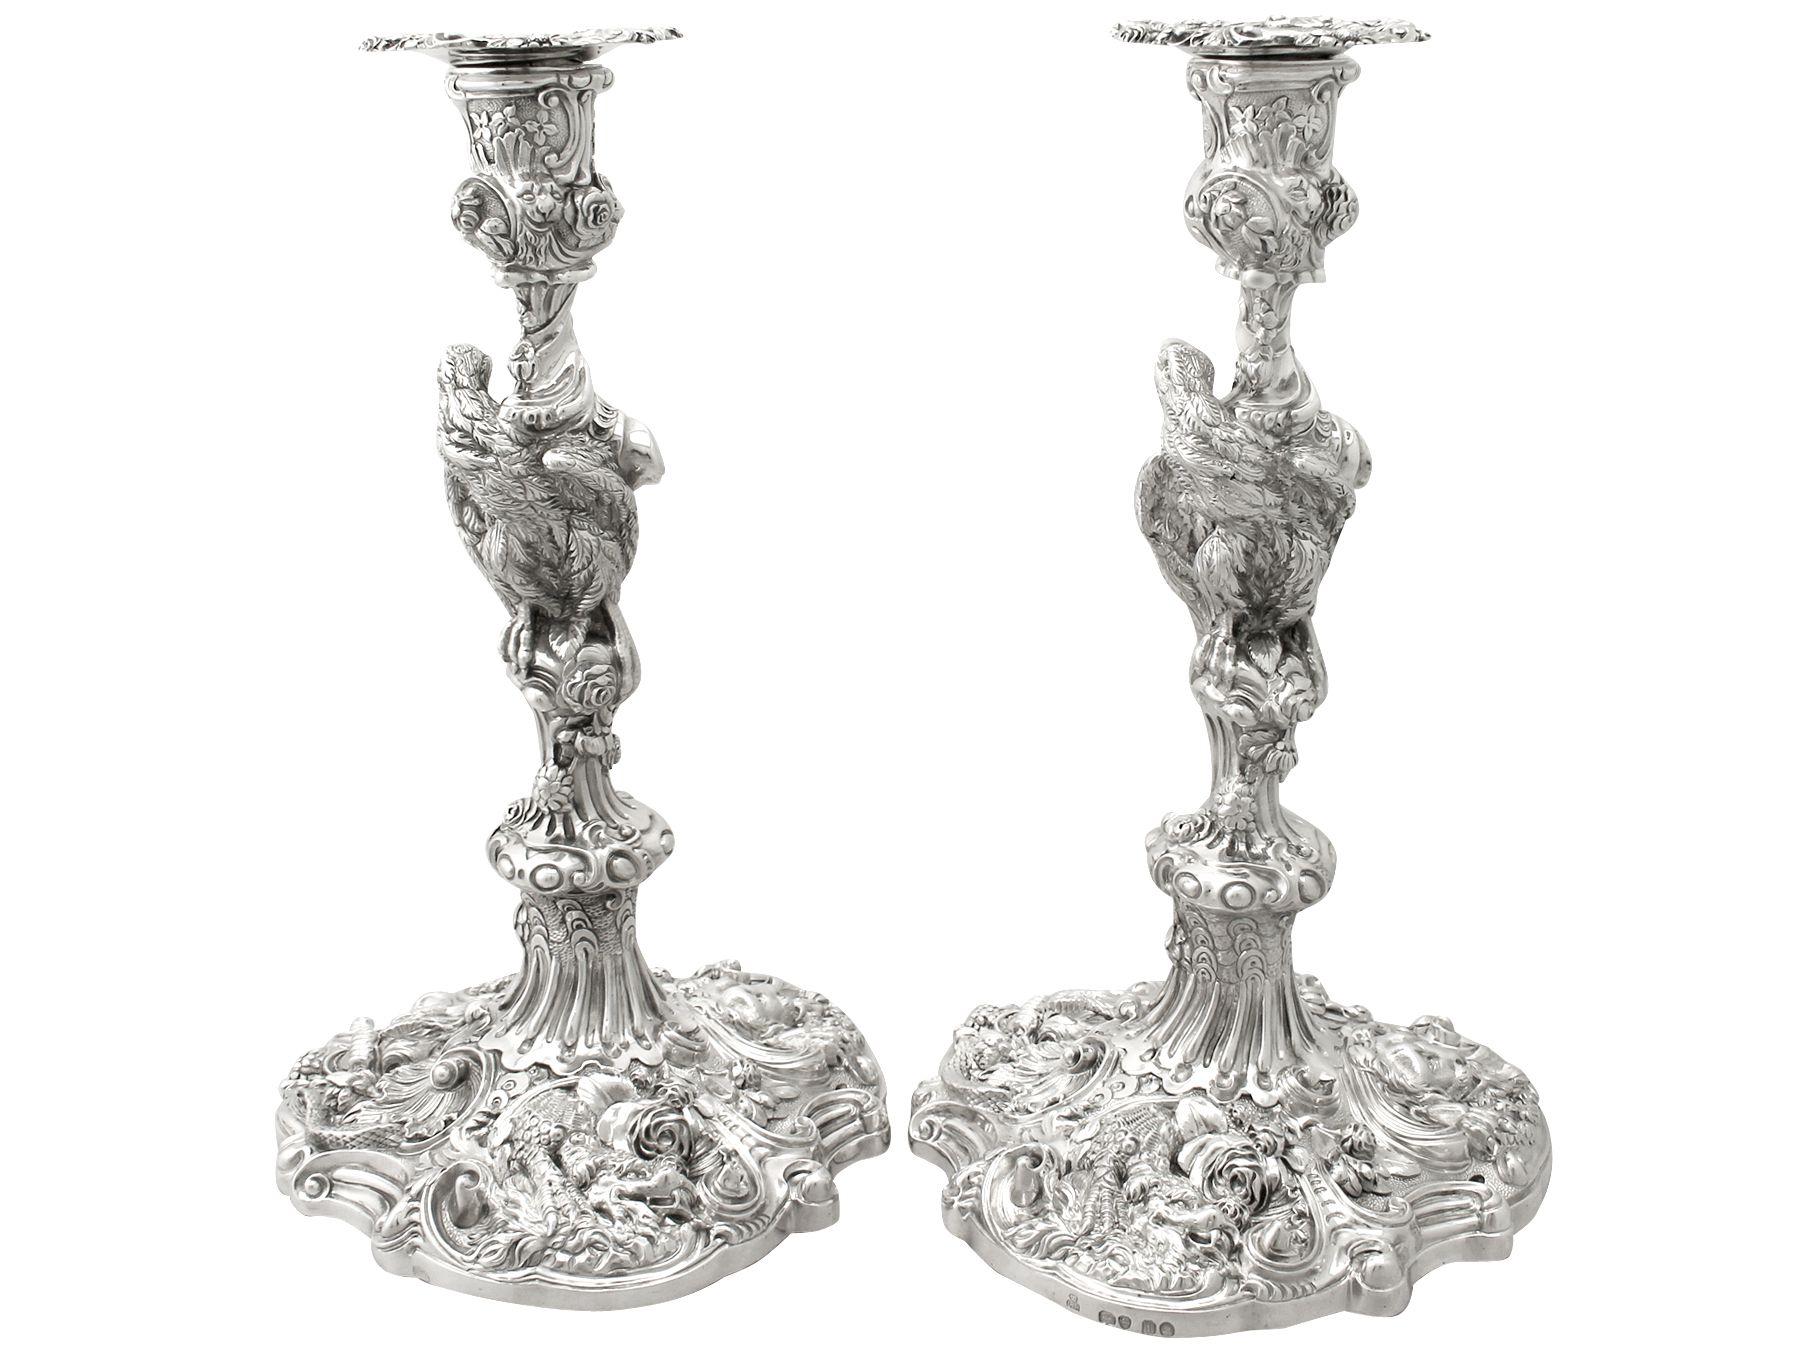 A magnificent, fine impressive pair of antique George IV English cast sterling silver candlesticks made by Robert Garrard II; an addition of our ornamental silverware collection

These magnificent antique George IV cast silver candlesticks, in